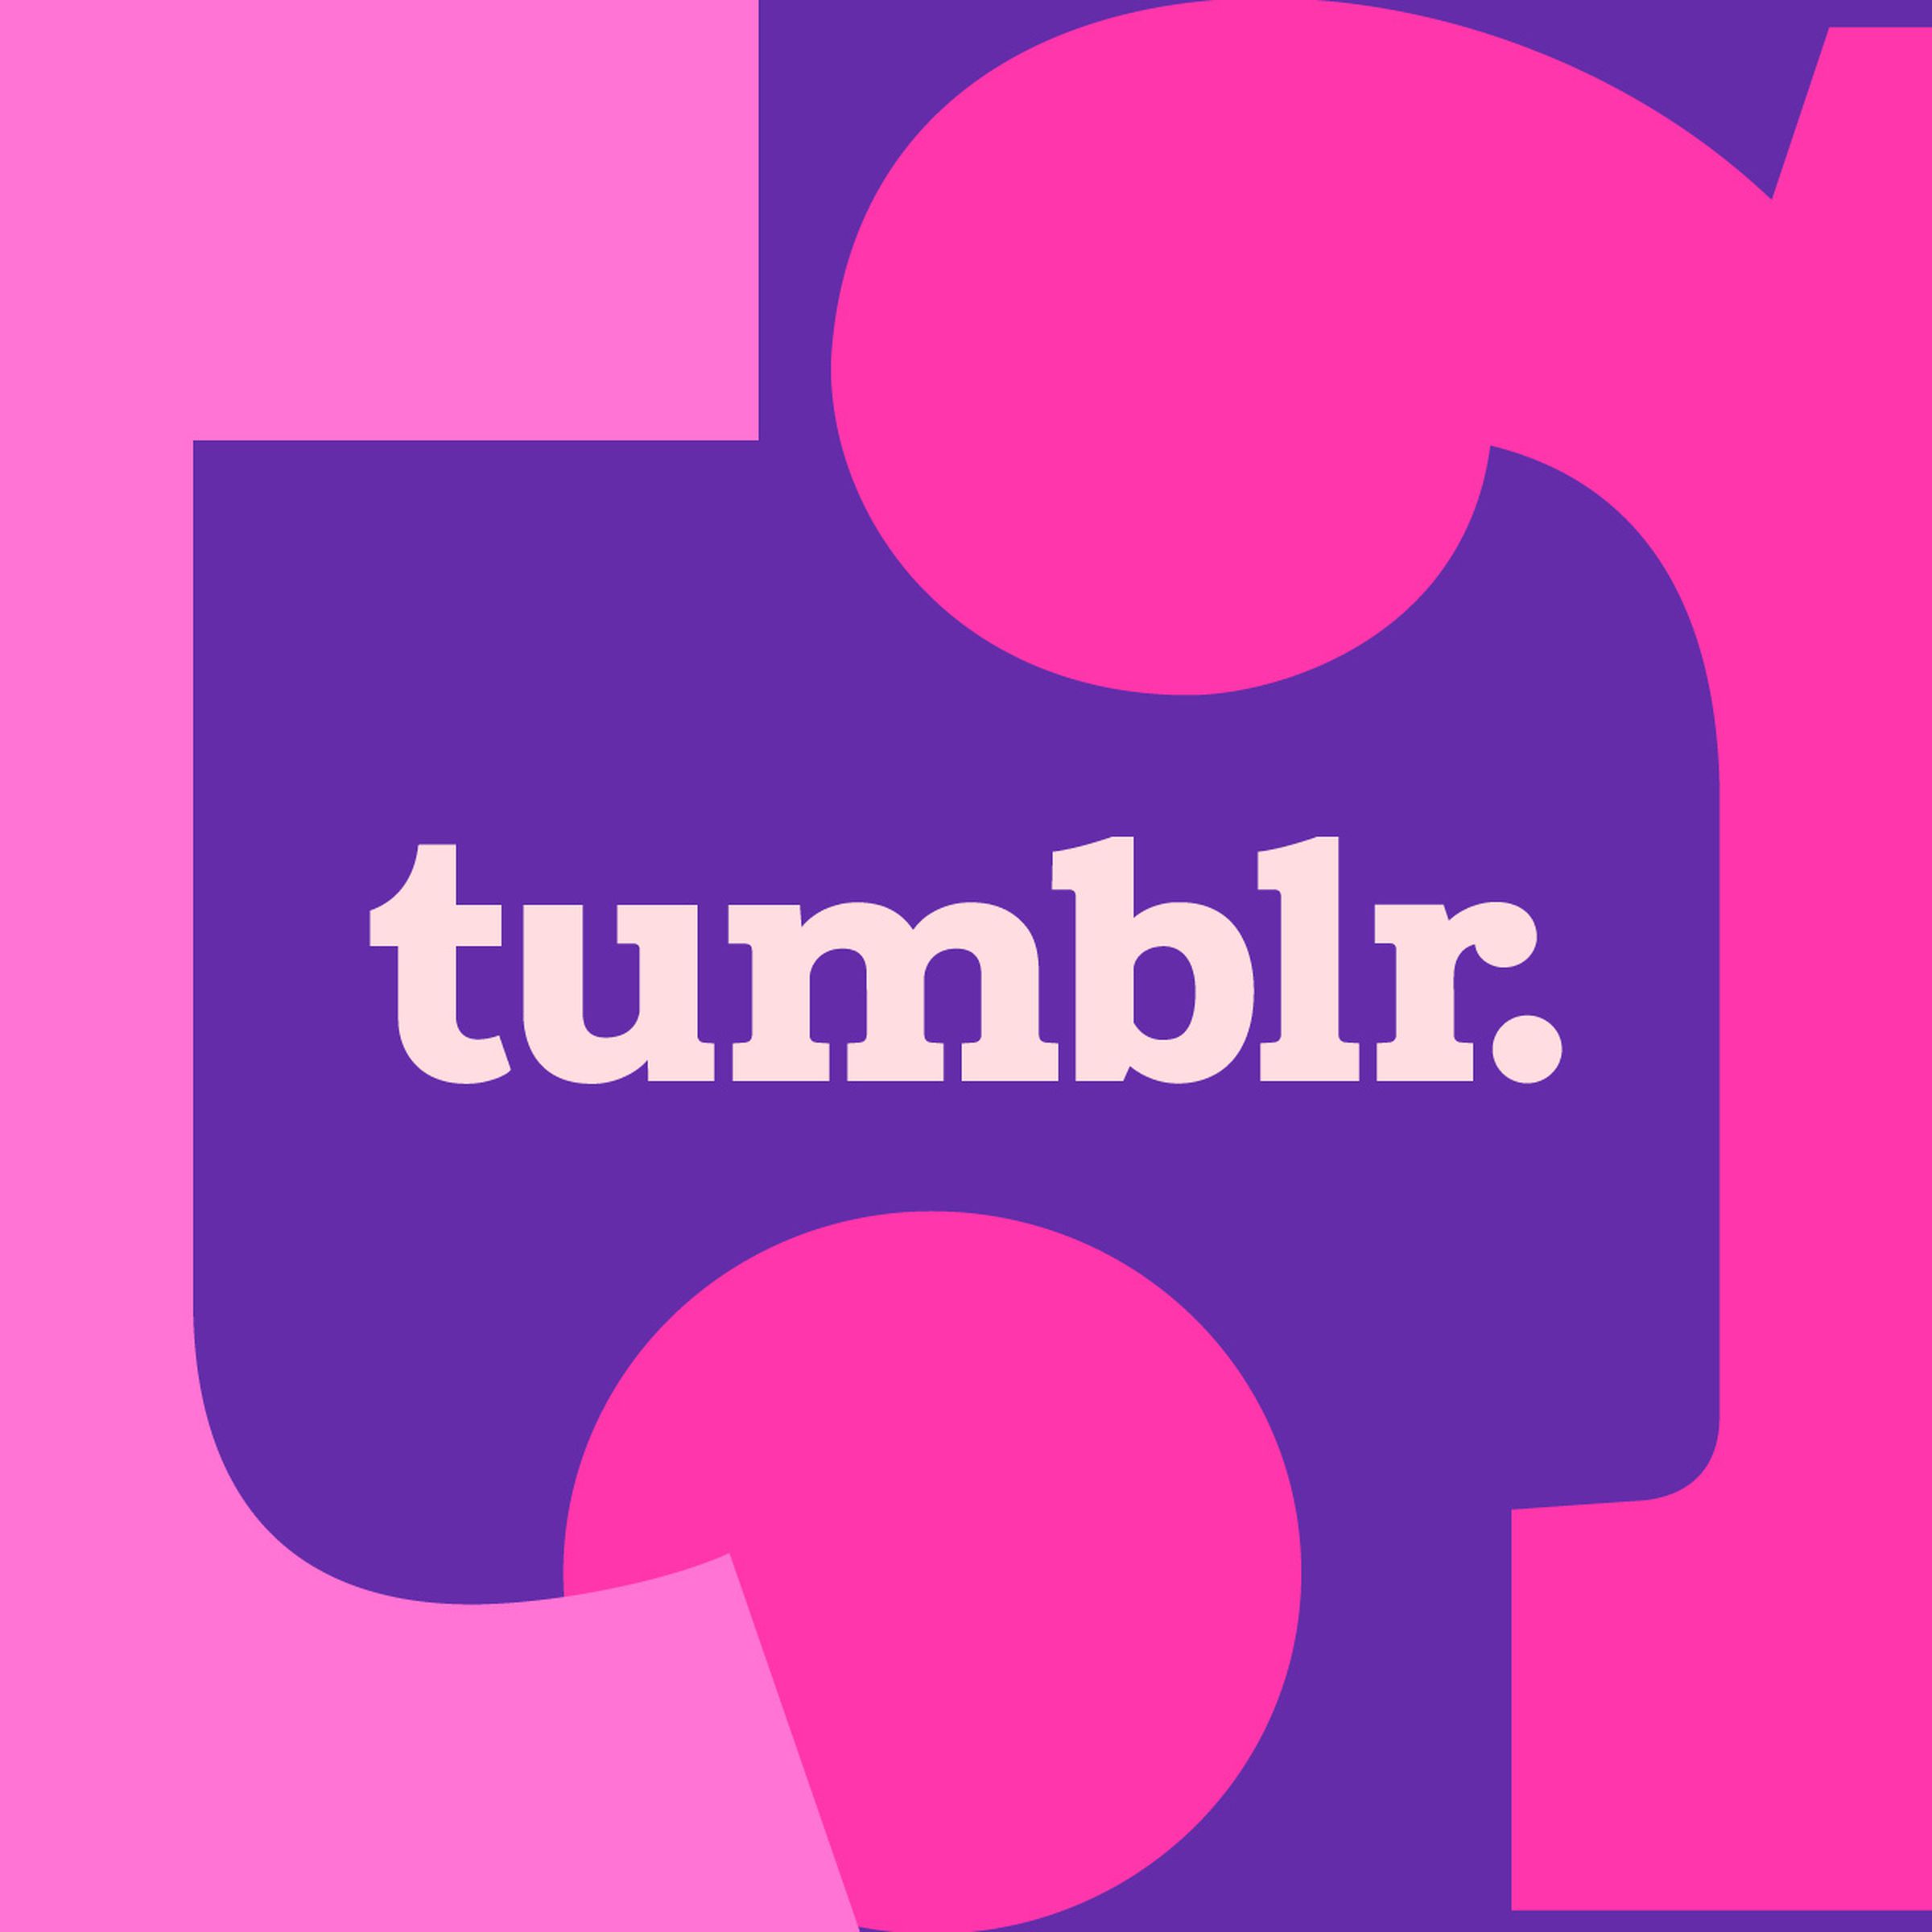 The Tumblr logo on a pink and purple background